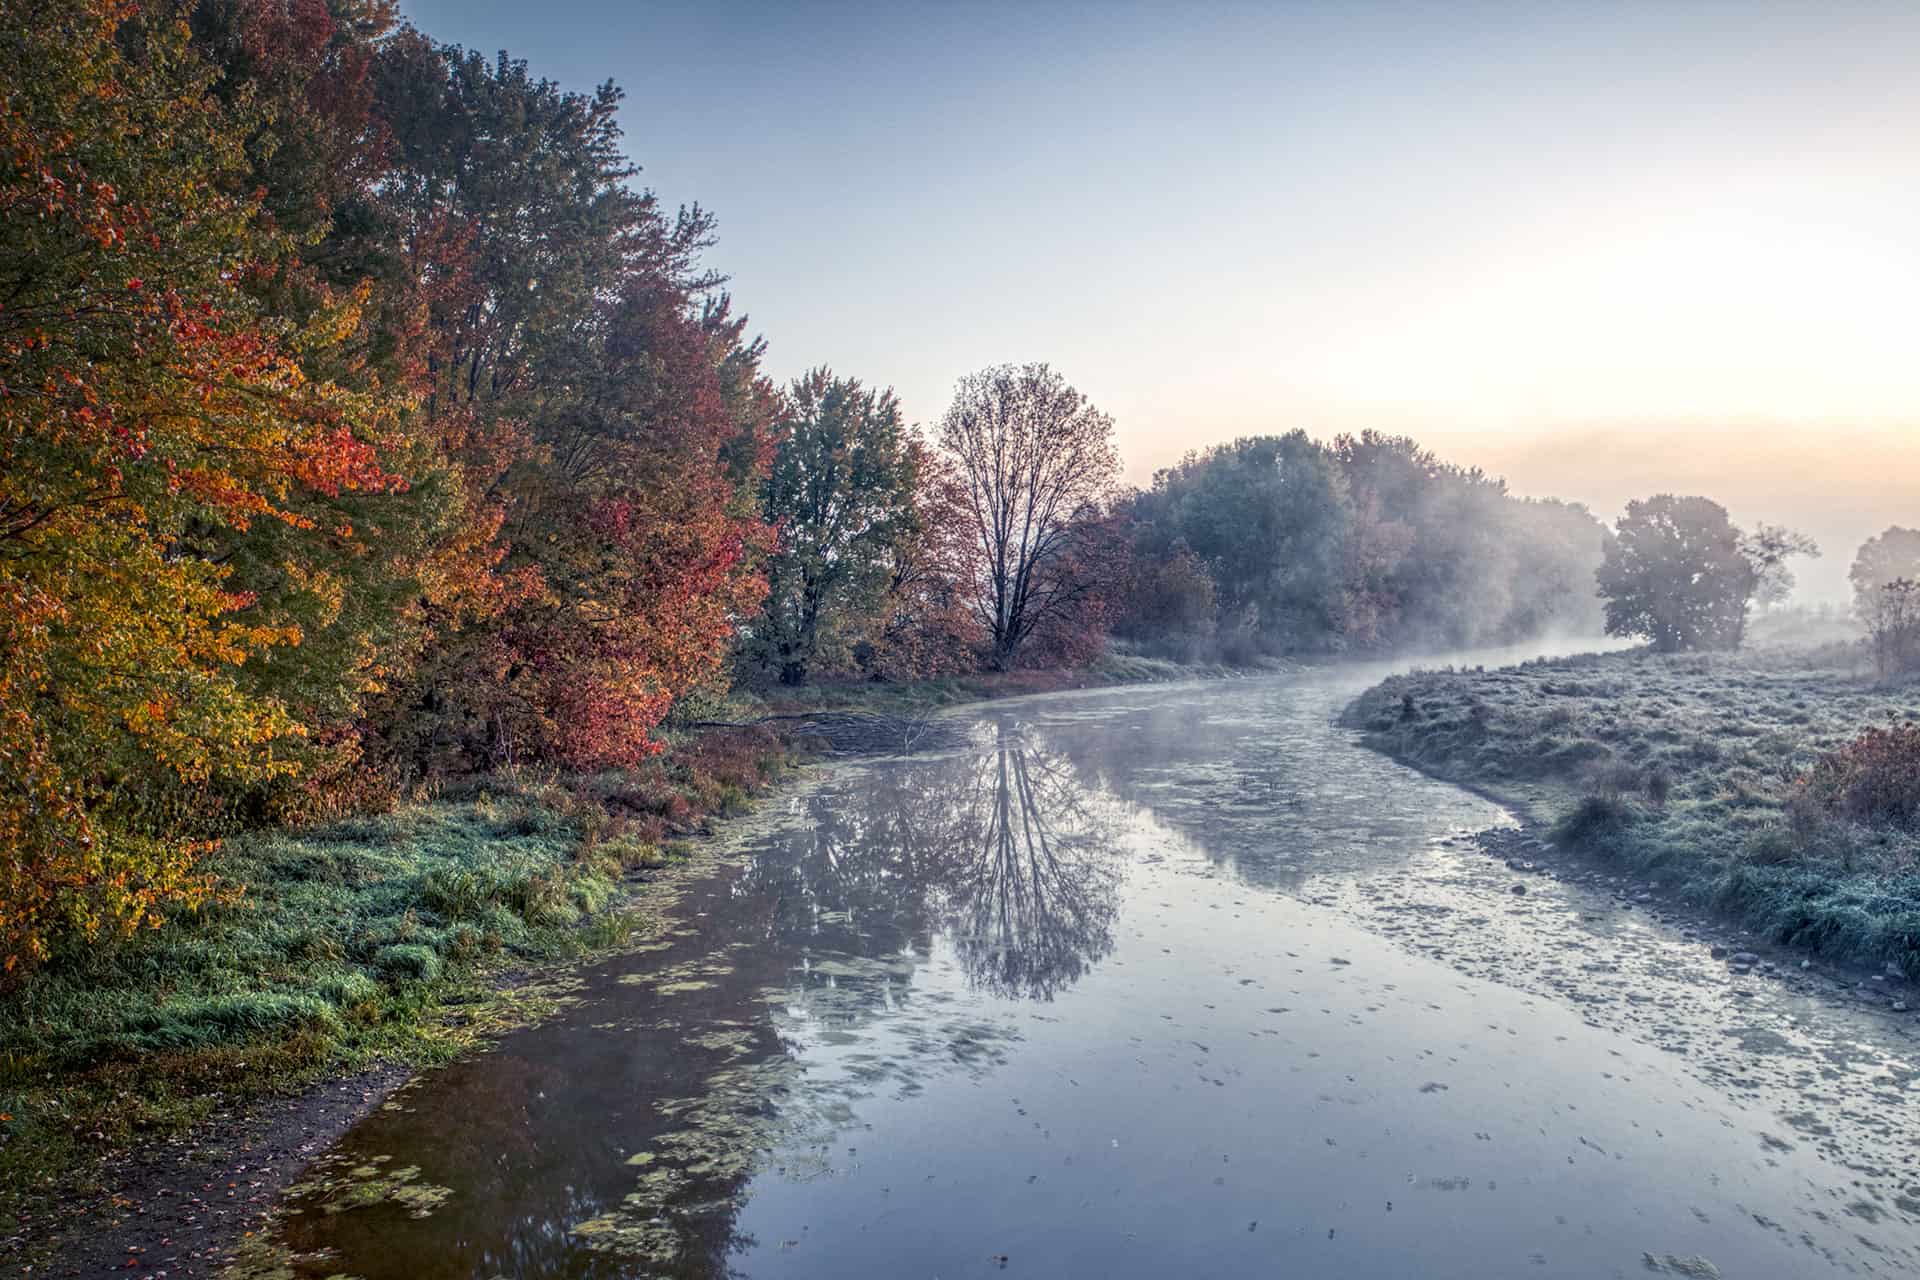 An image of a calm river during the fall.